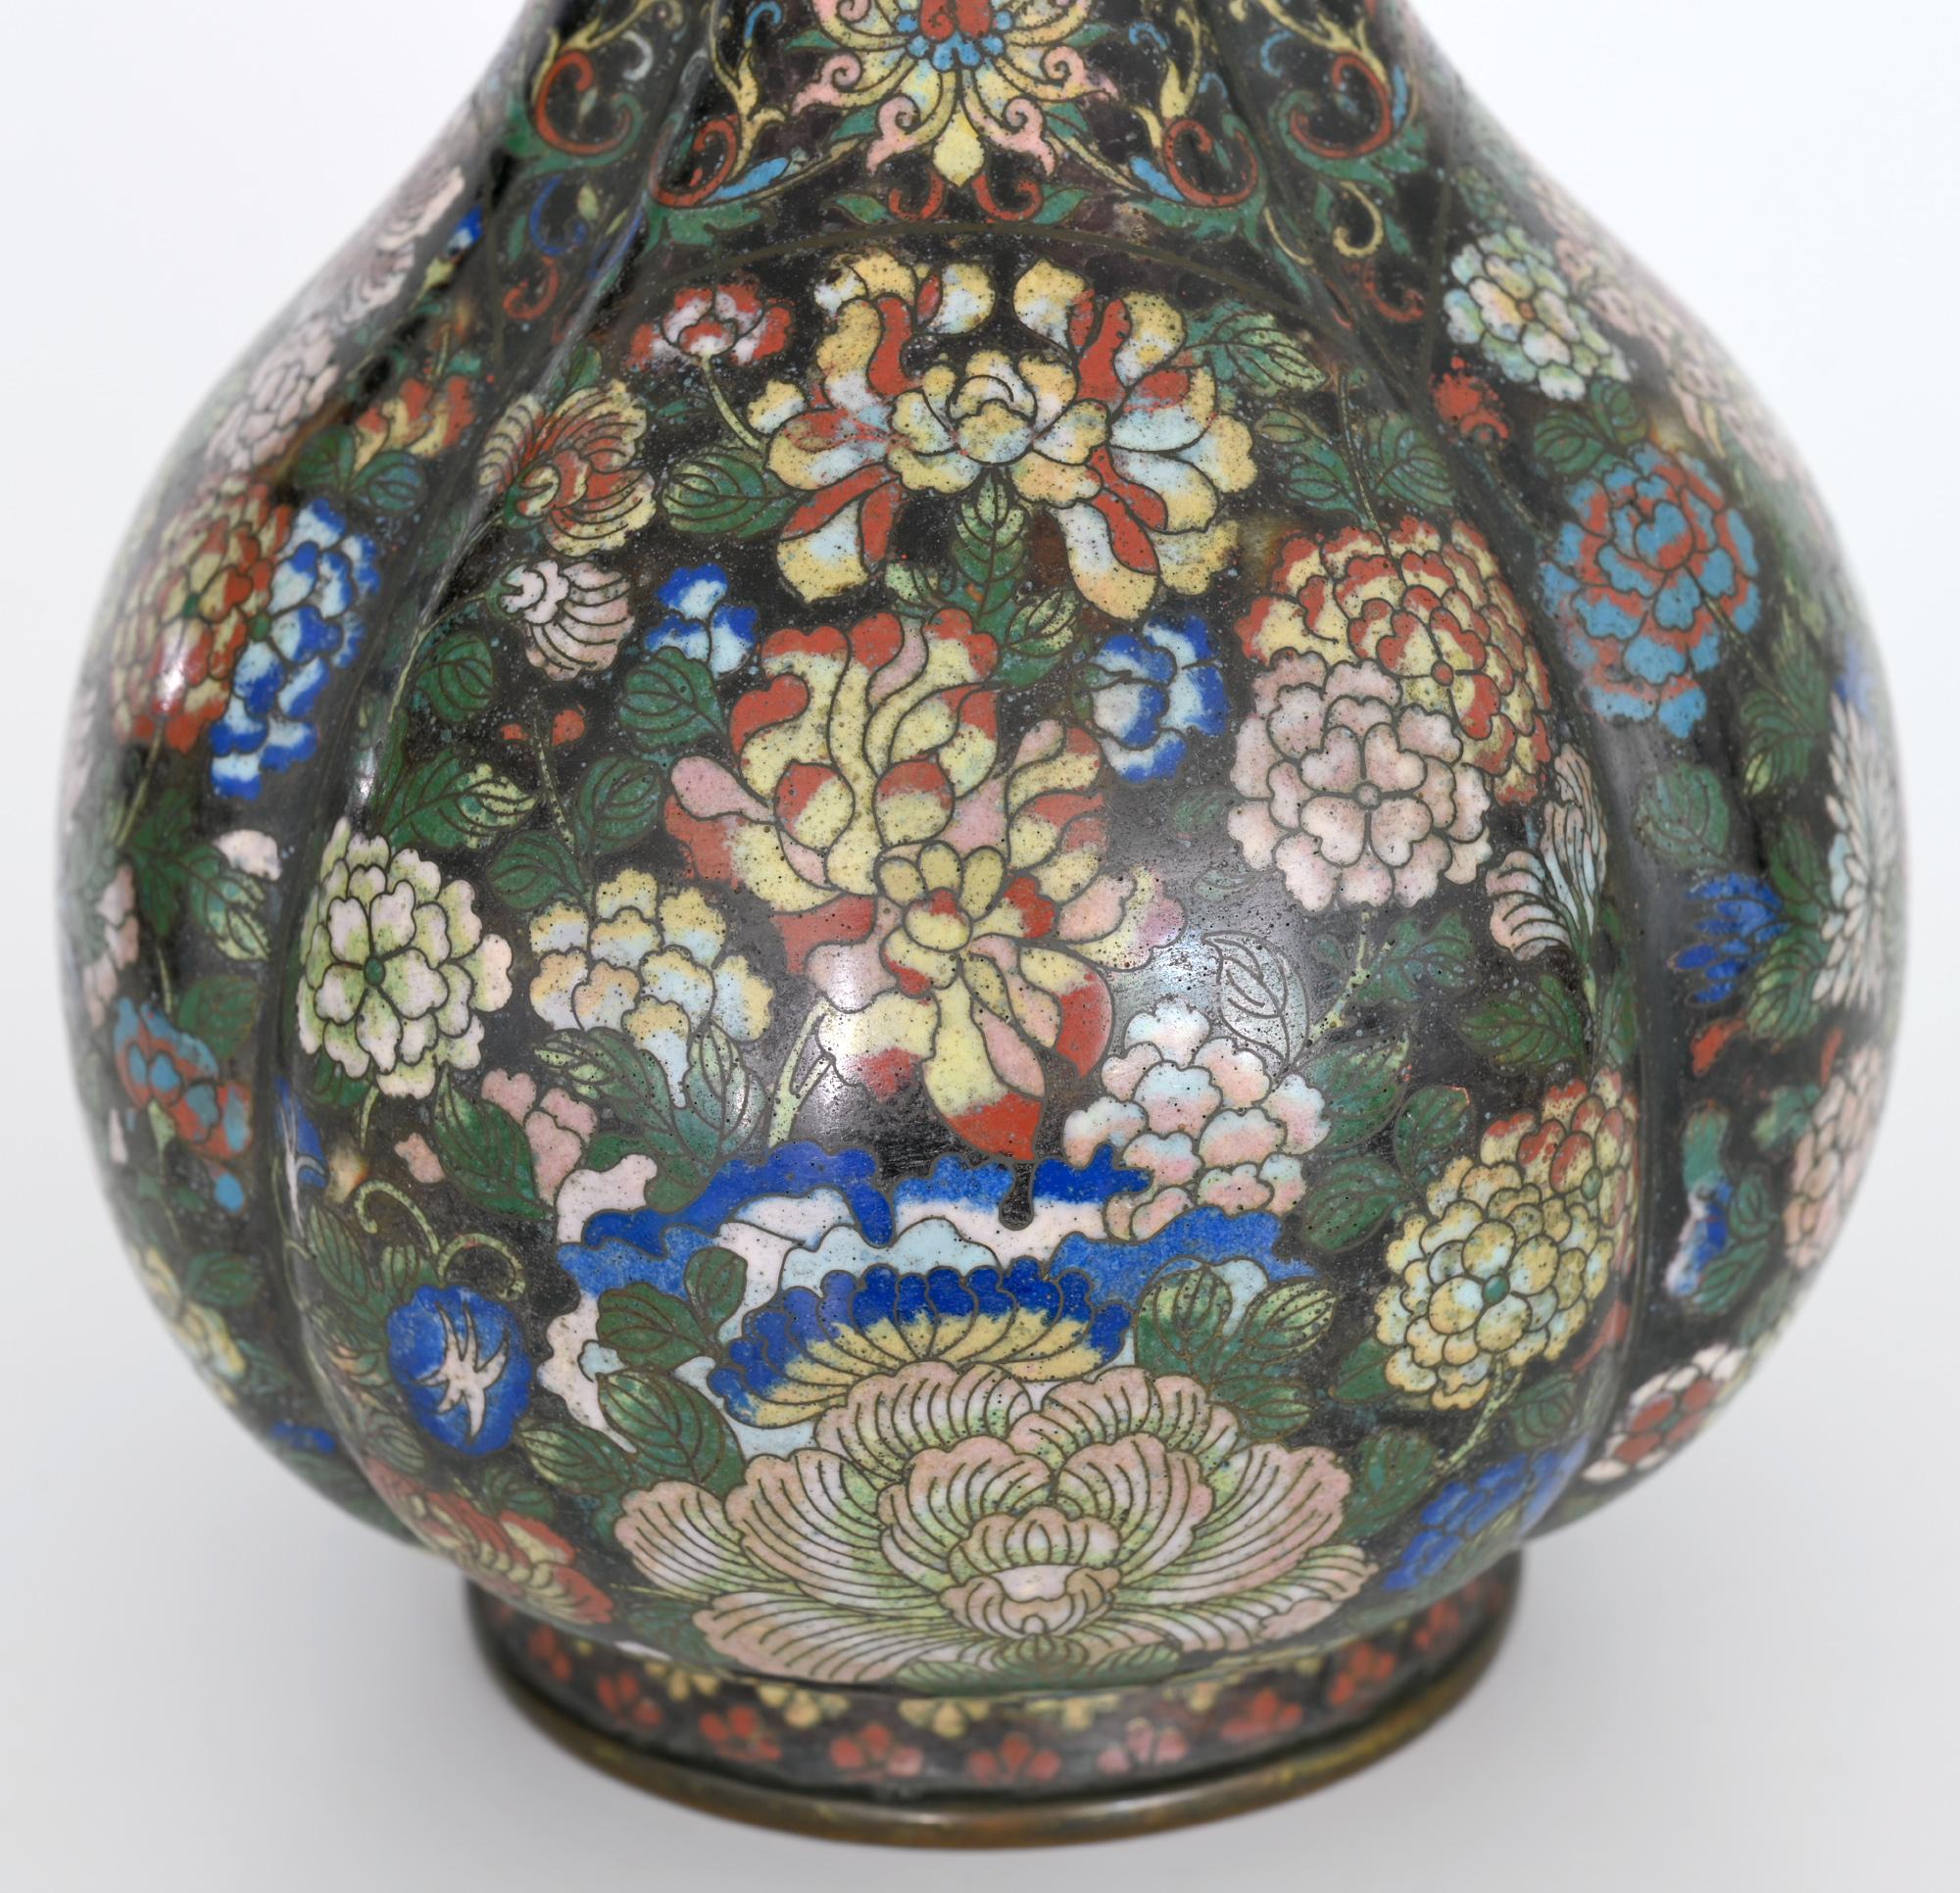 Beautiful cloisonné vase made in the beginning of the early 19th century in China.